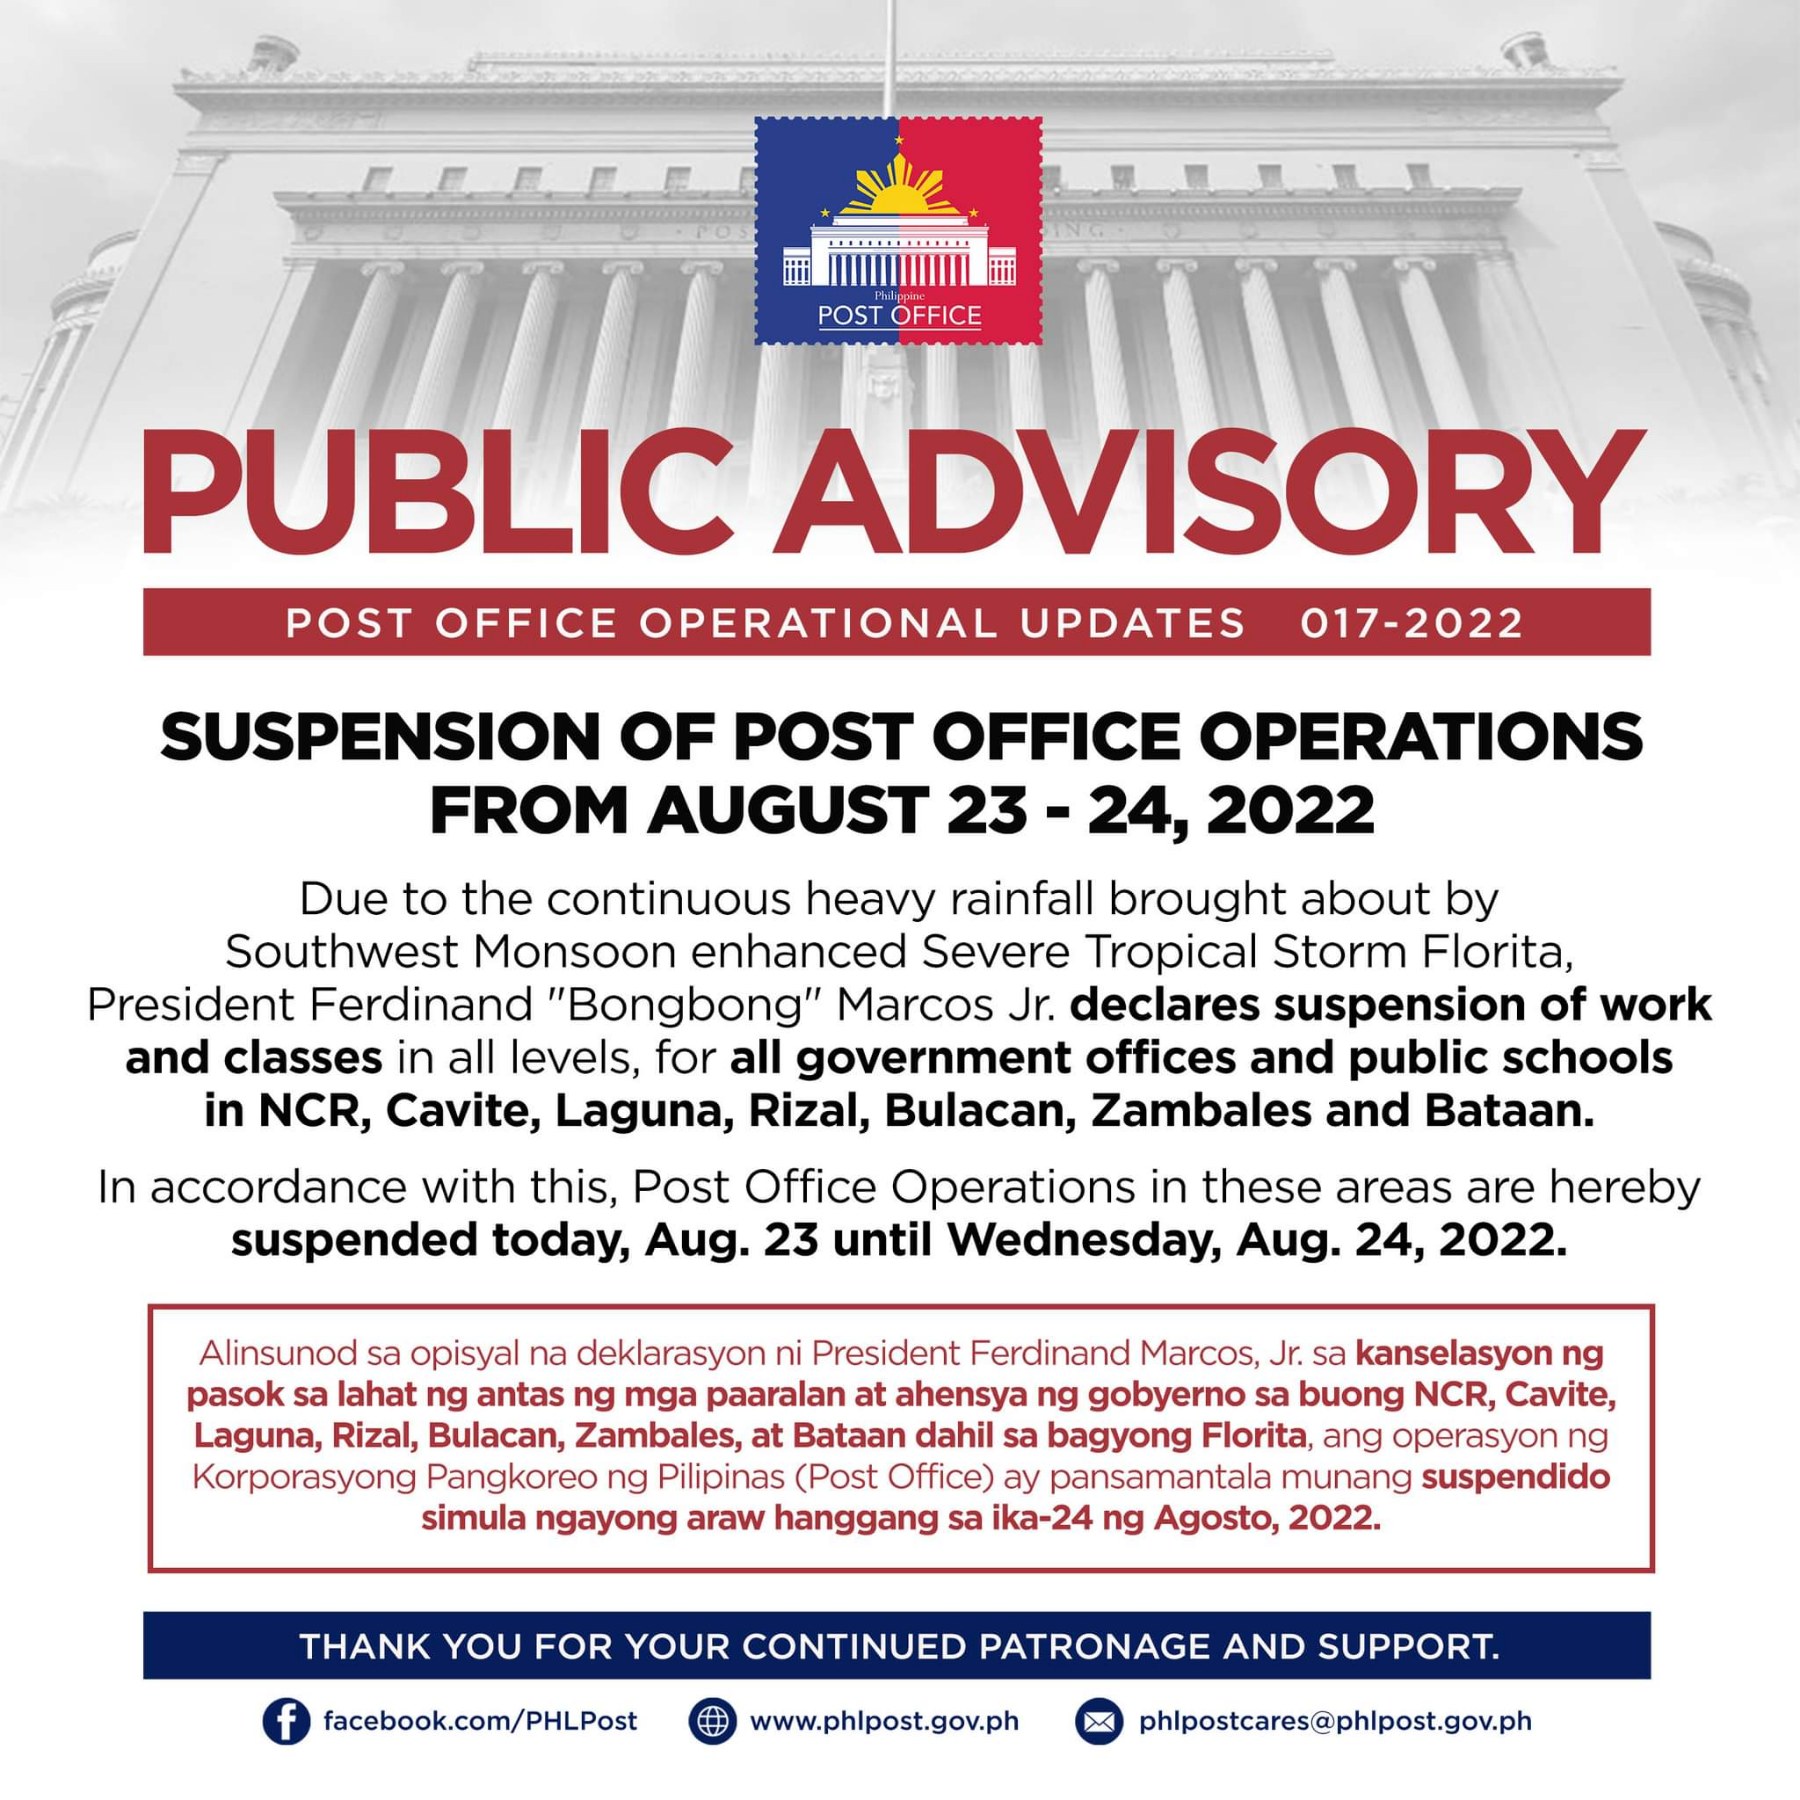 POST OFFICE Operational Update 17-2022: Suspension of Post Office Operations